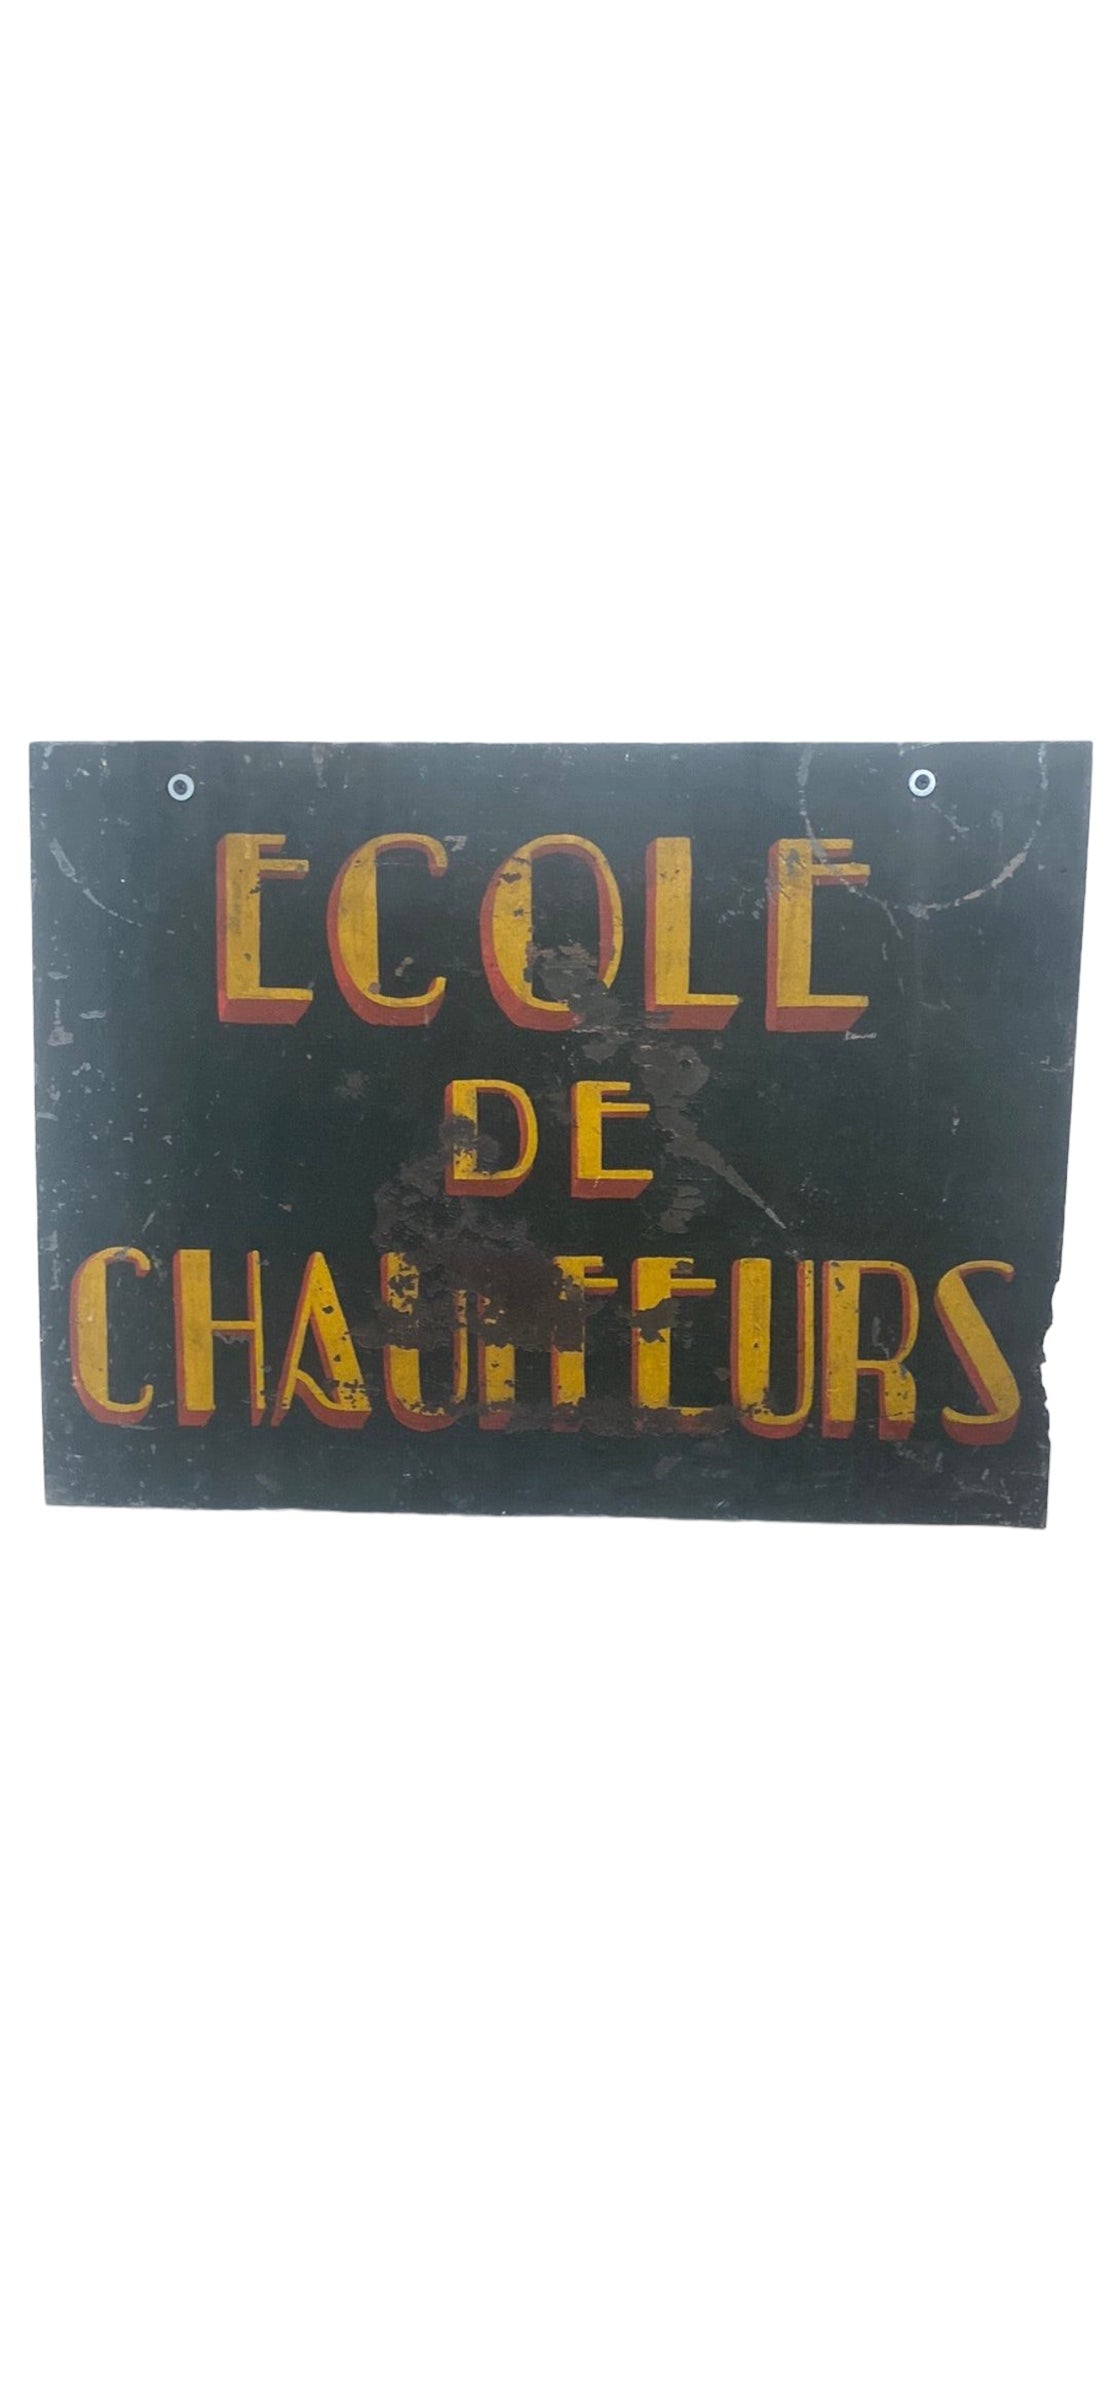 Hanging Double Sided French Metal Trade Sign: Ecole de Chauffeur